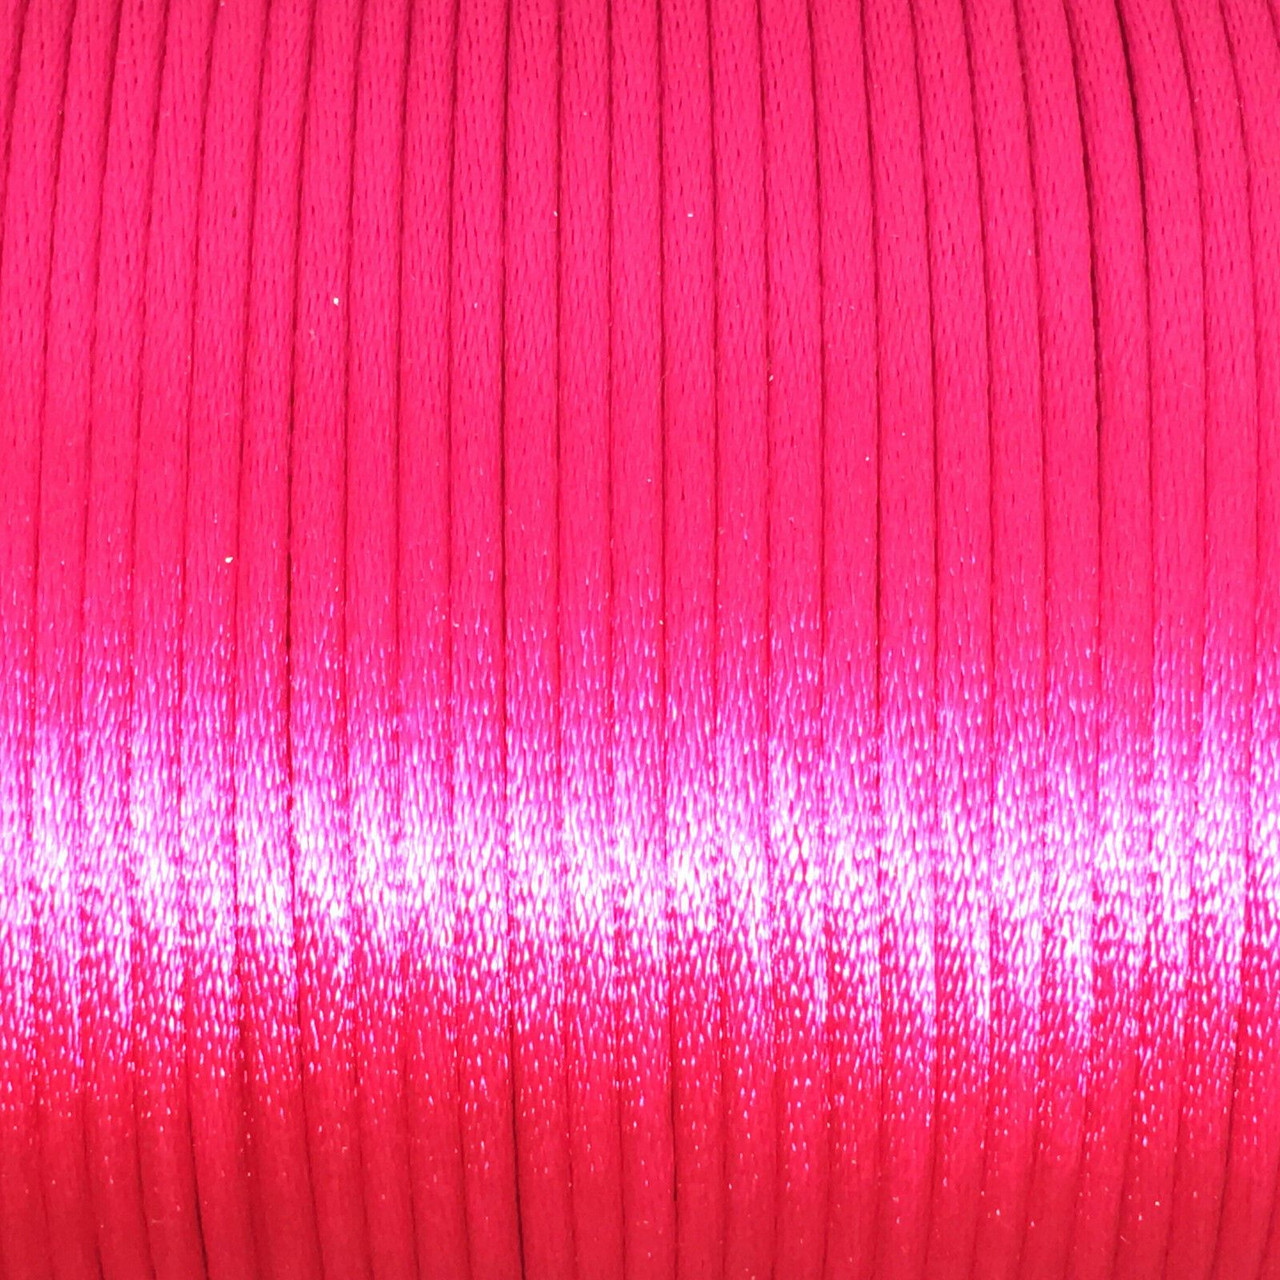 Reel of Nylon Cord (Rattail) - Shocking Pink, approx 45m